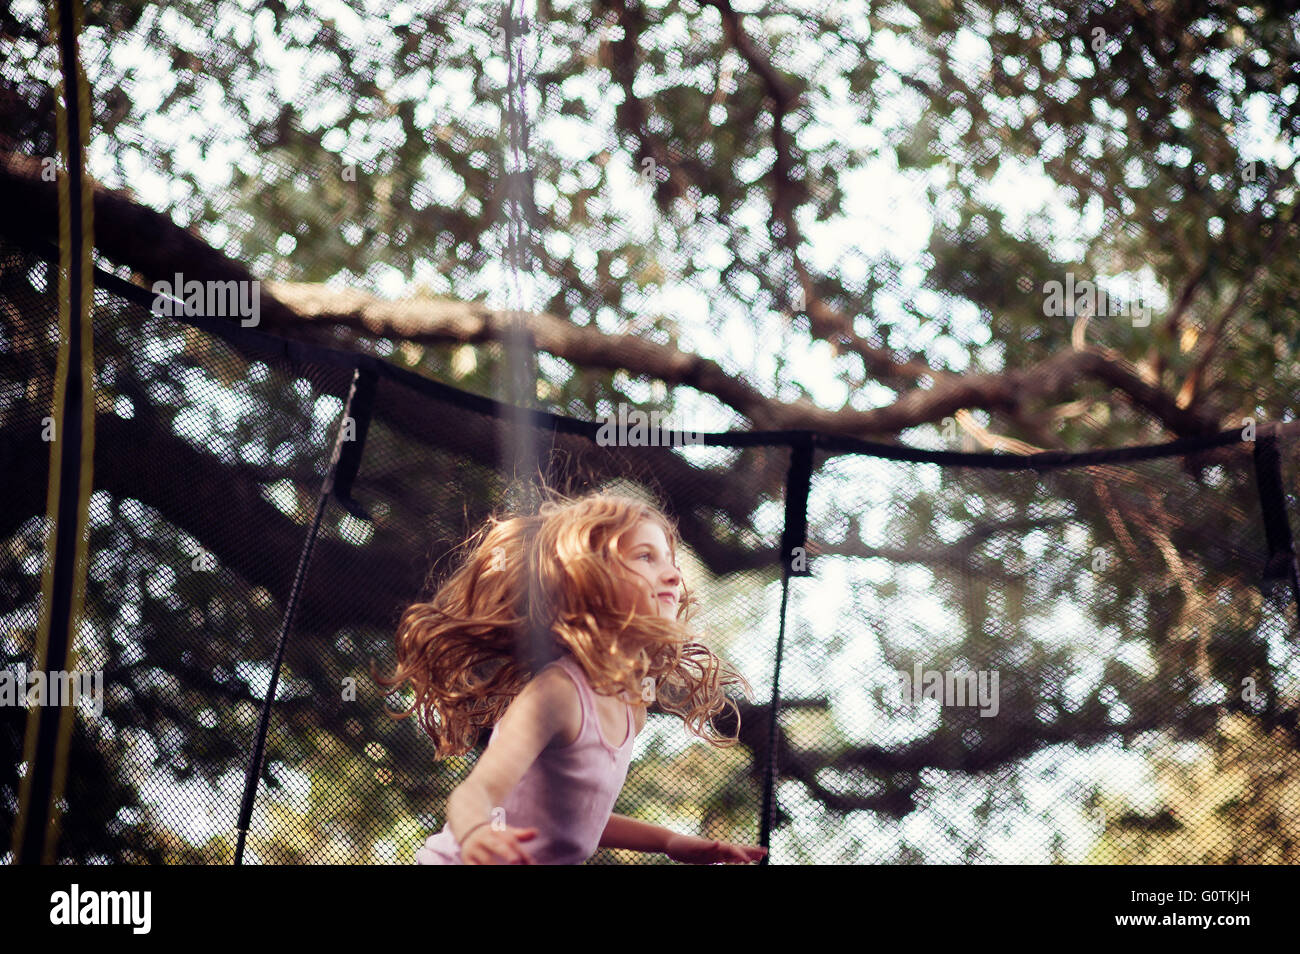 girl jumping on trampoline Stock Photo